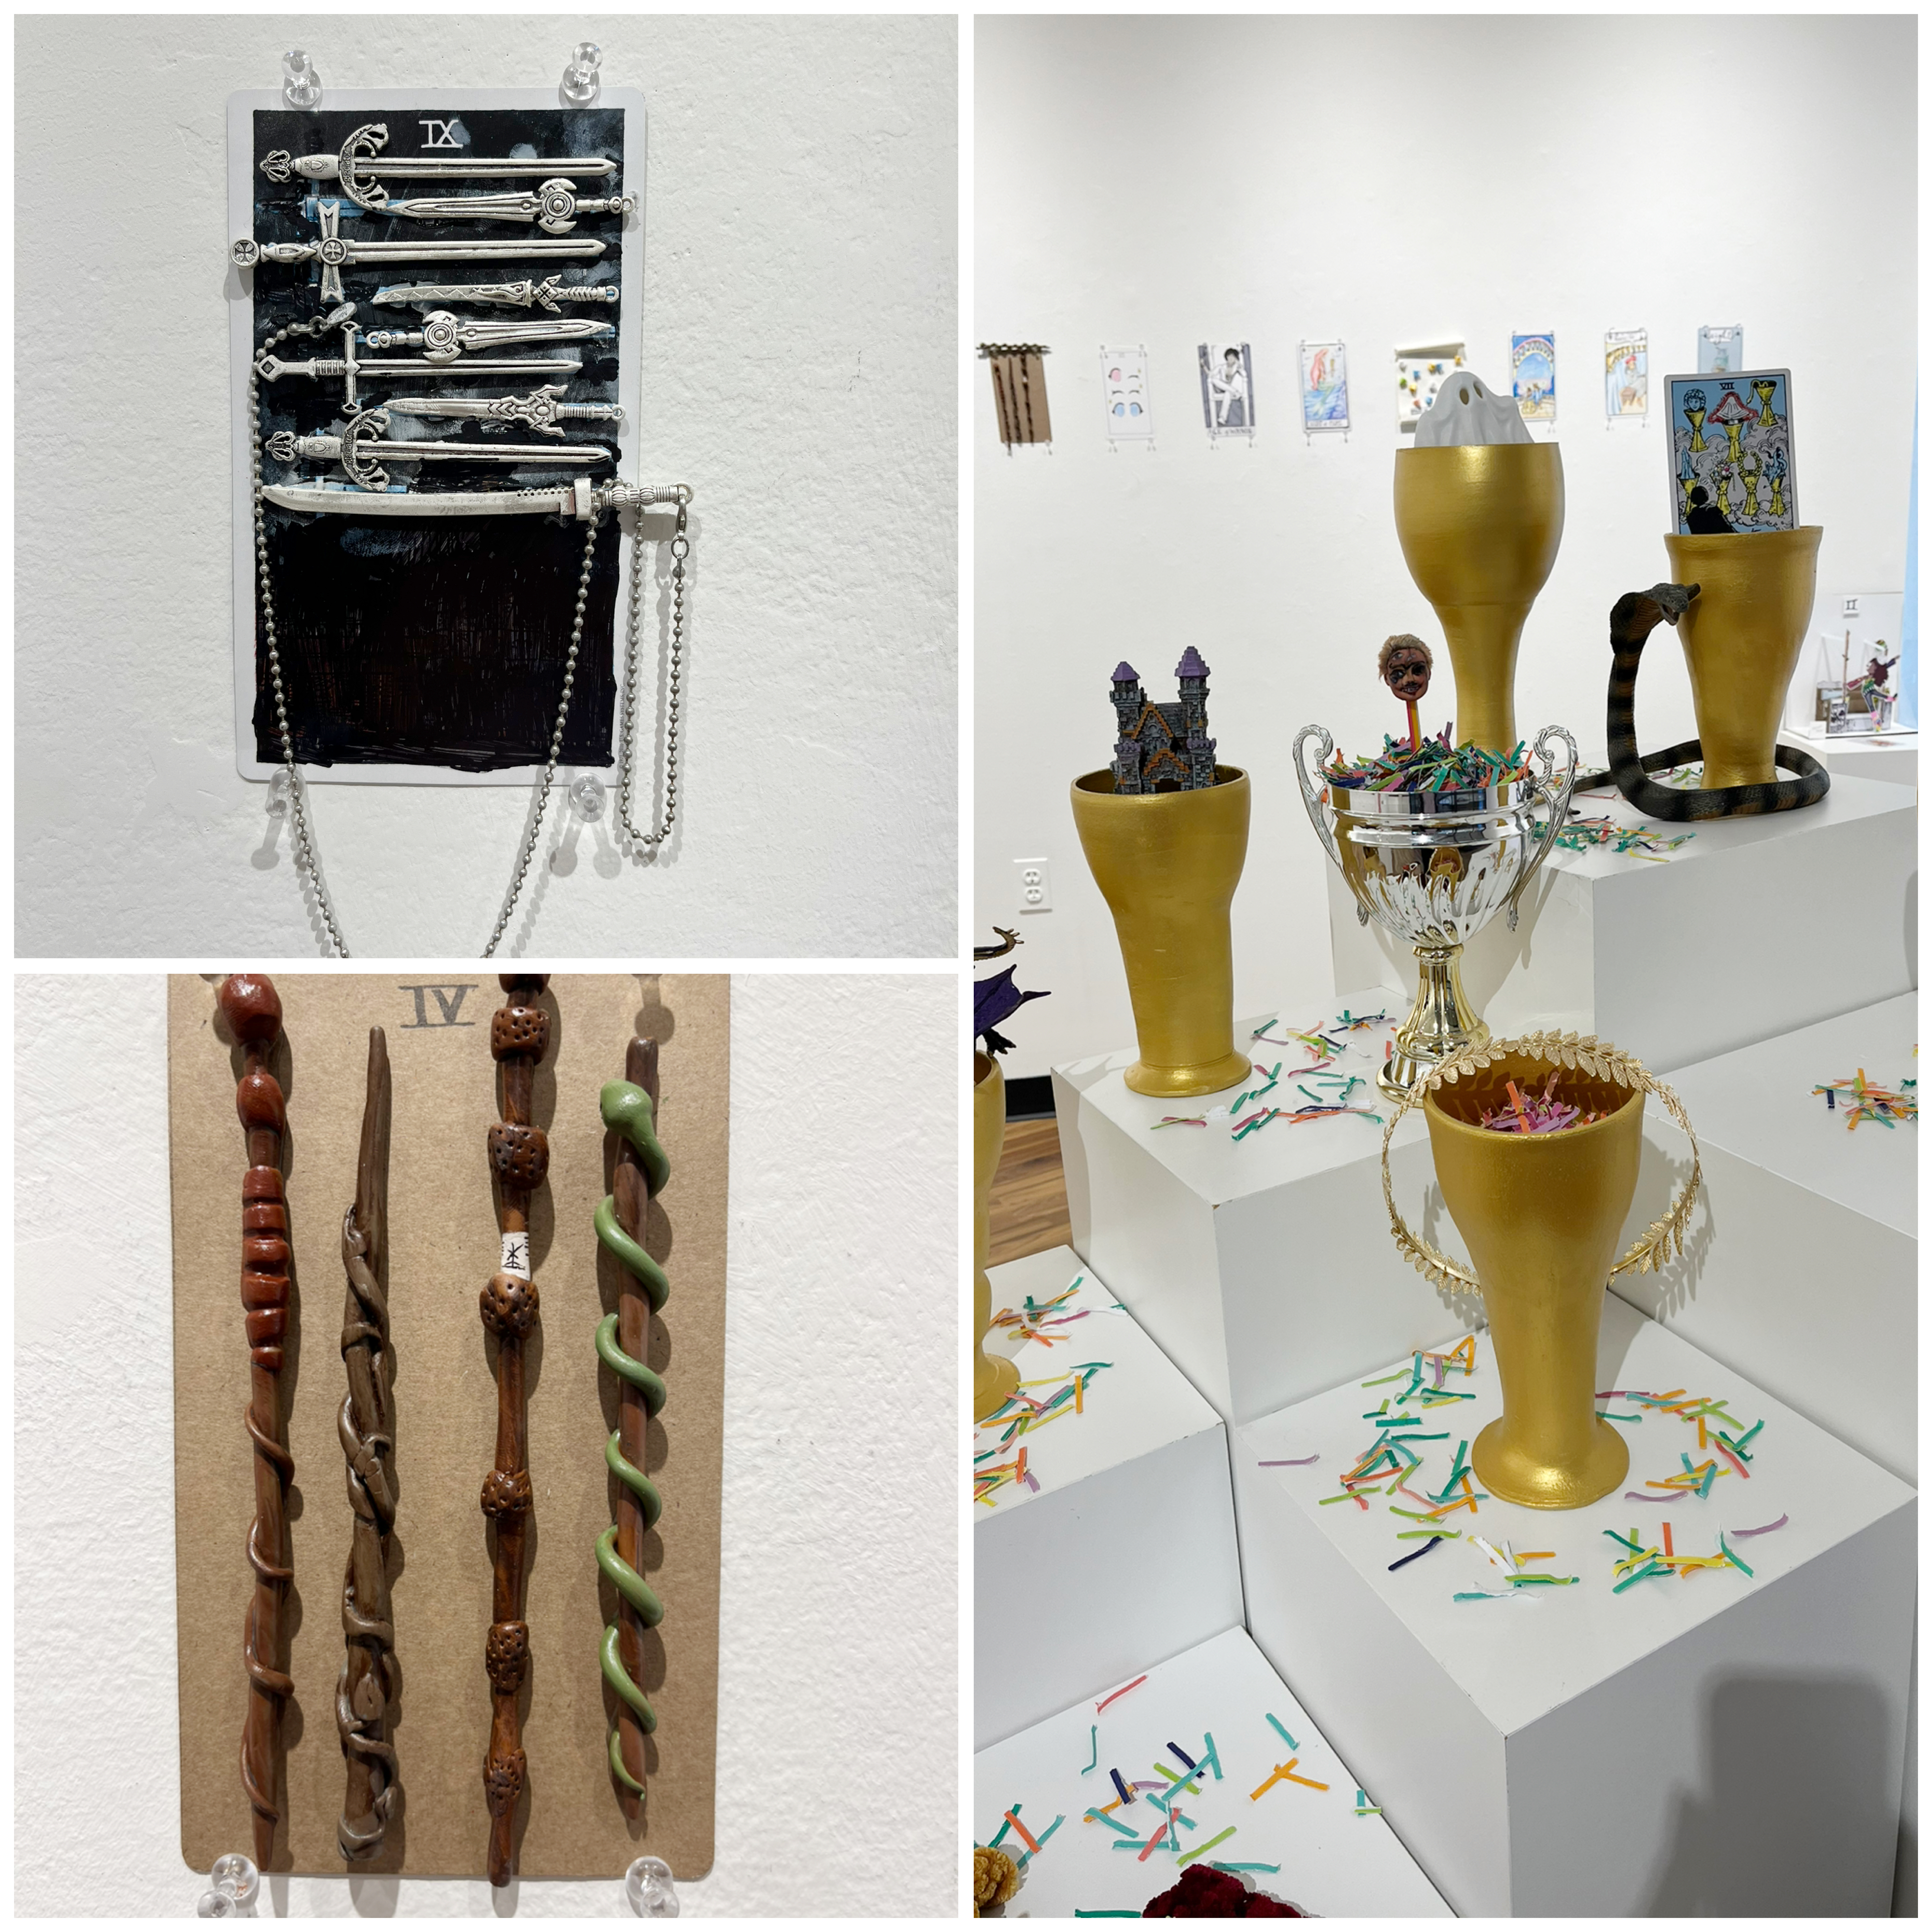 A collage of three of the works in the exhibit